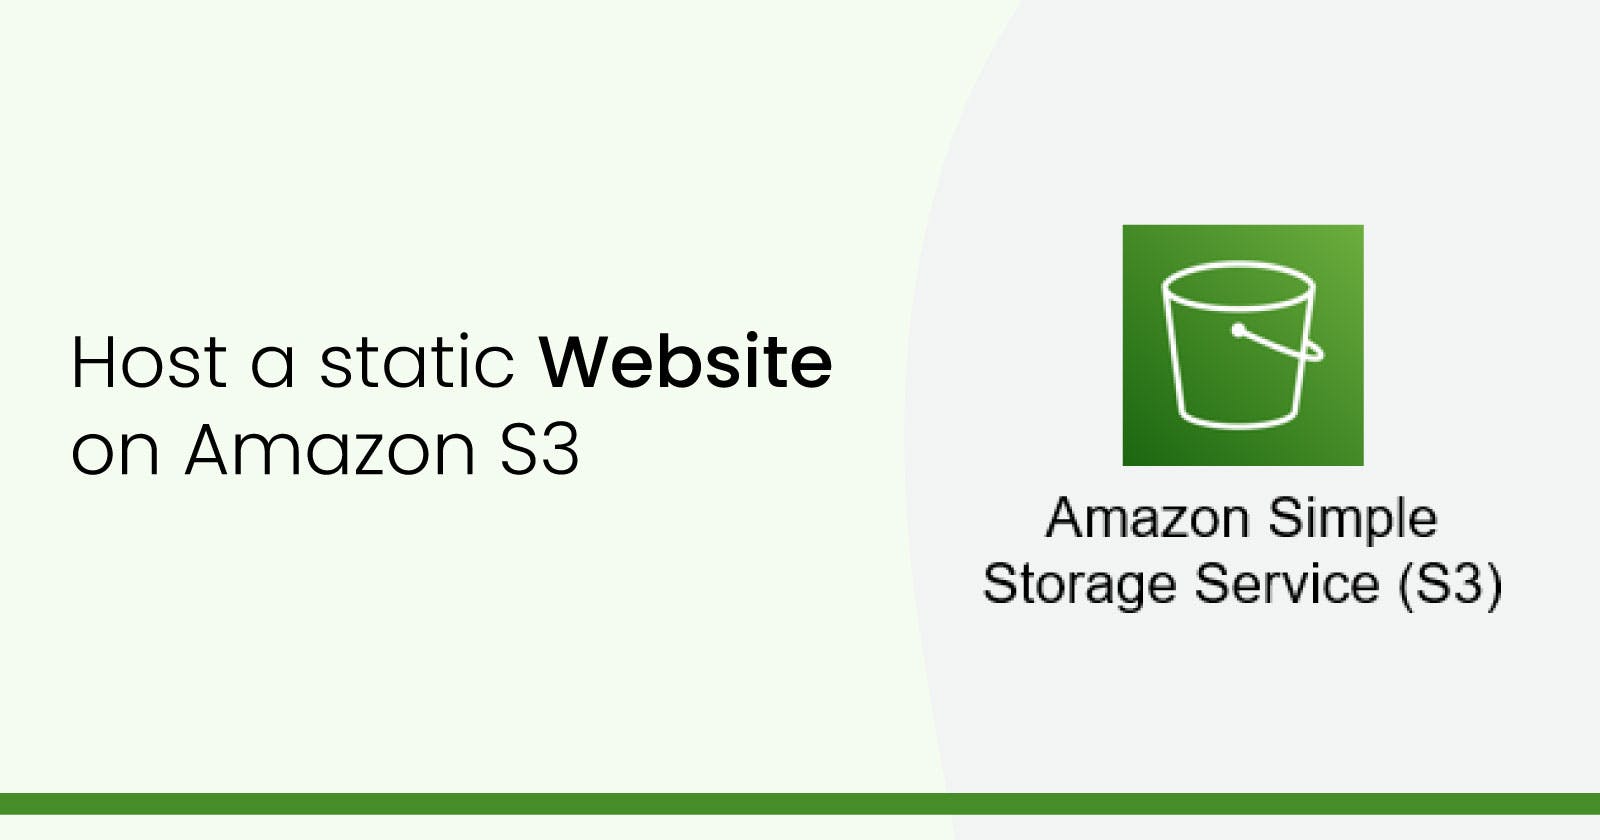 Host a static website on Amazon S3